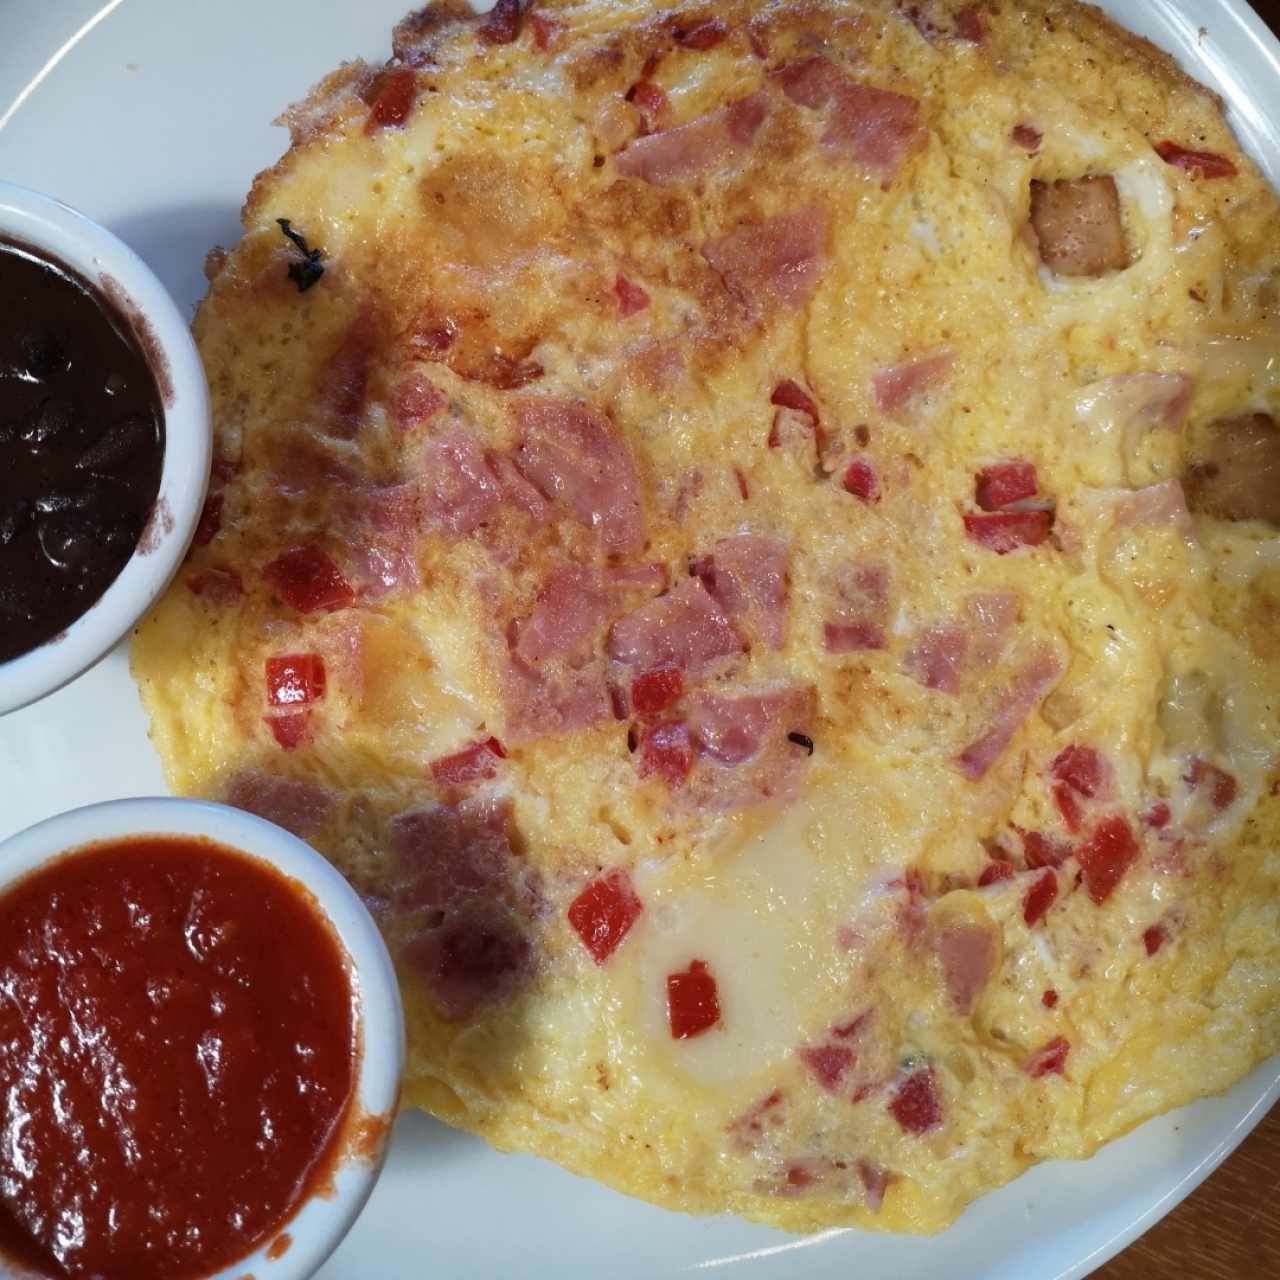 Omelette con Jamón y Queso Suizo